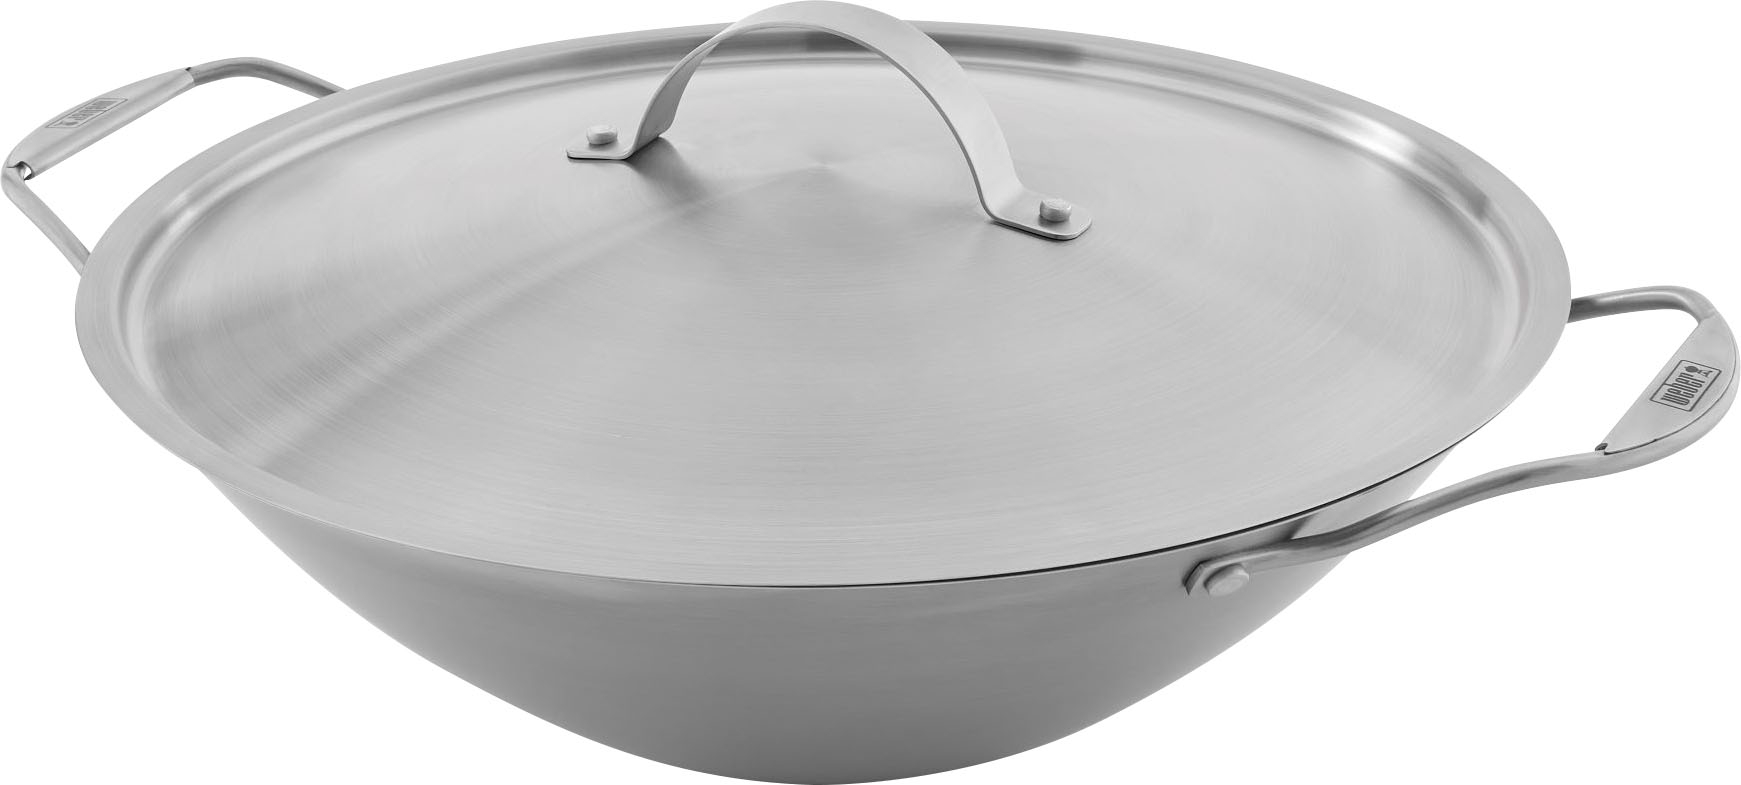 Angle View: Weber - Crafted Wok and Steamer - STAINLESS STEEL